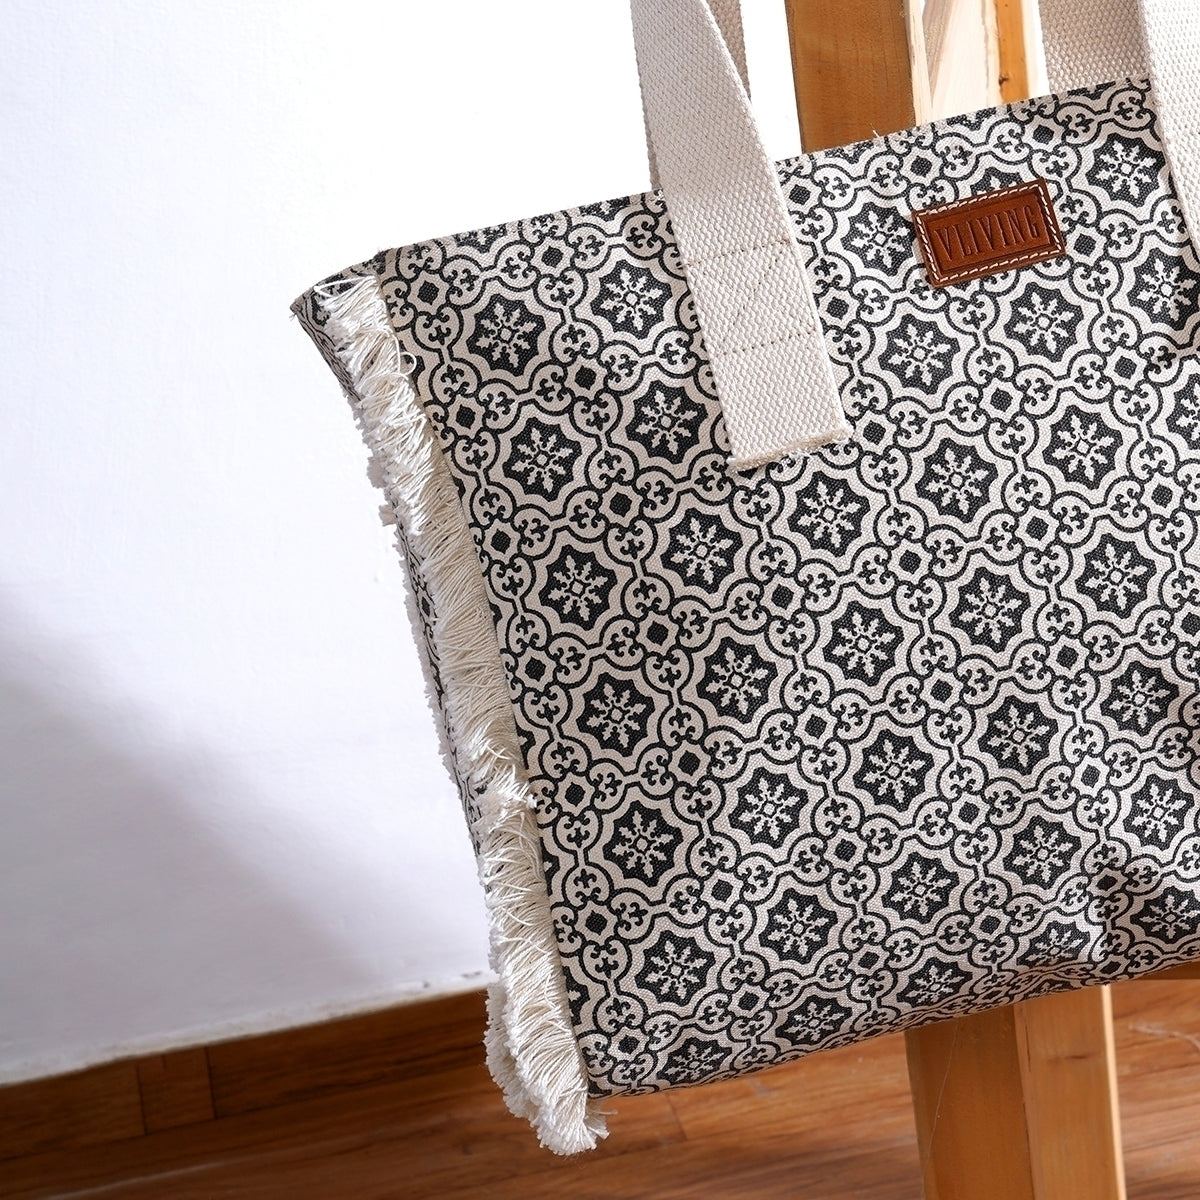 Black and white print canvas and leather tote bag, large tote, shoulder bag